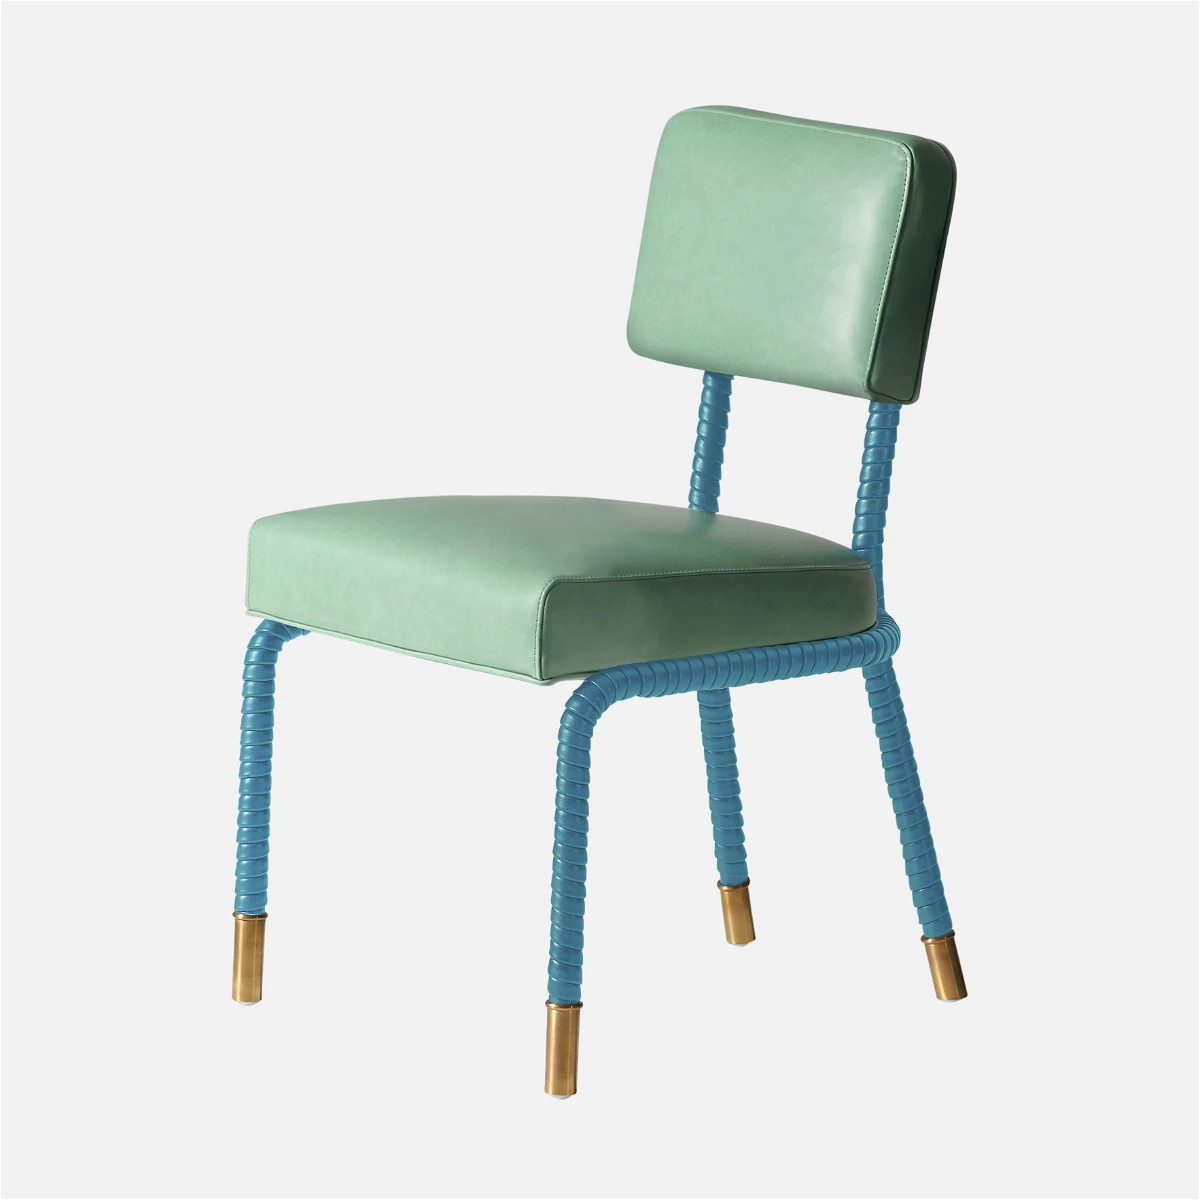 a green chair with wooden legs and a blue seat